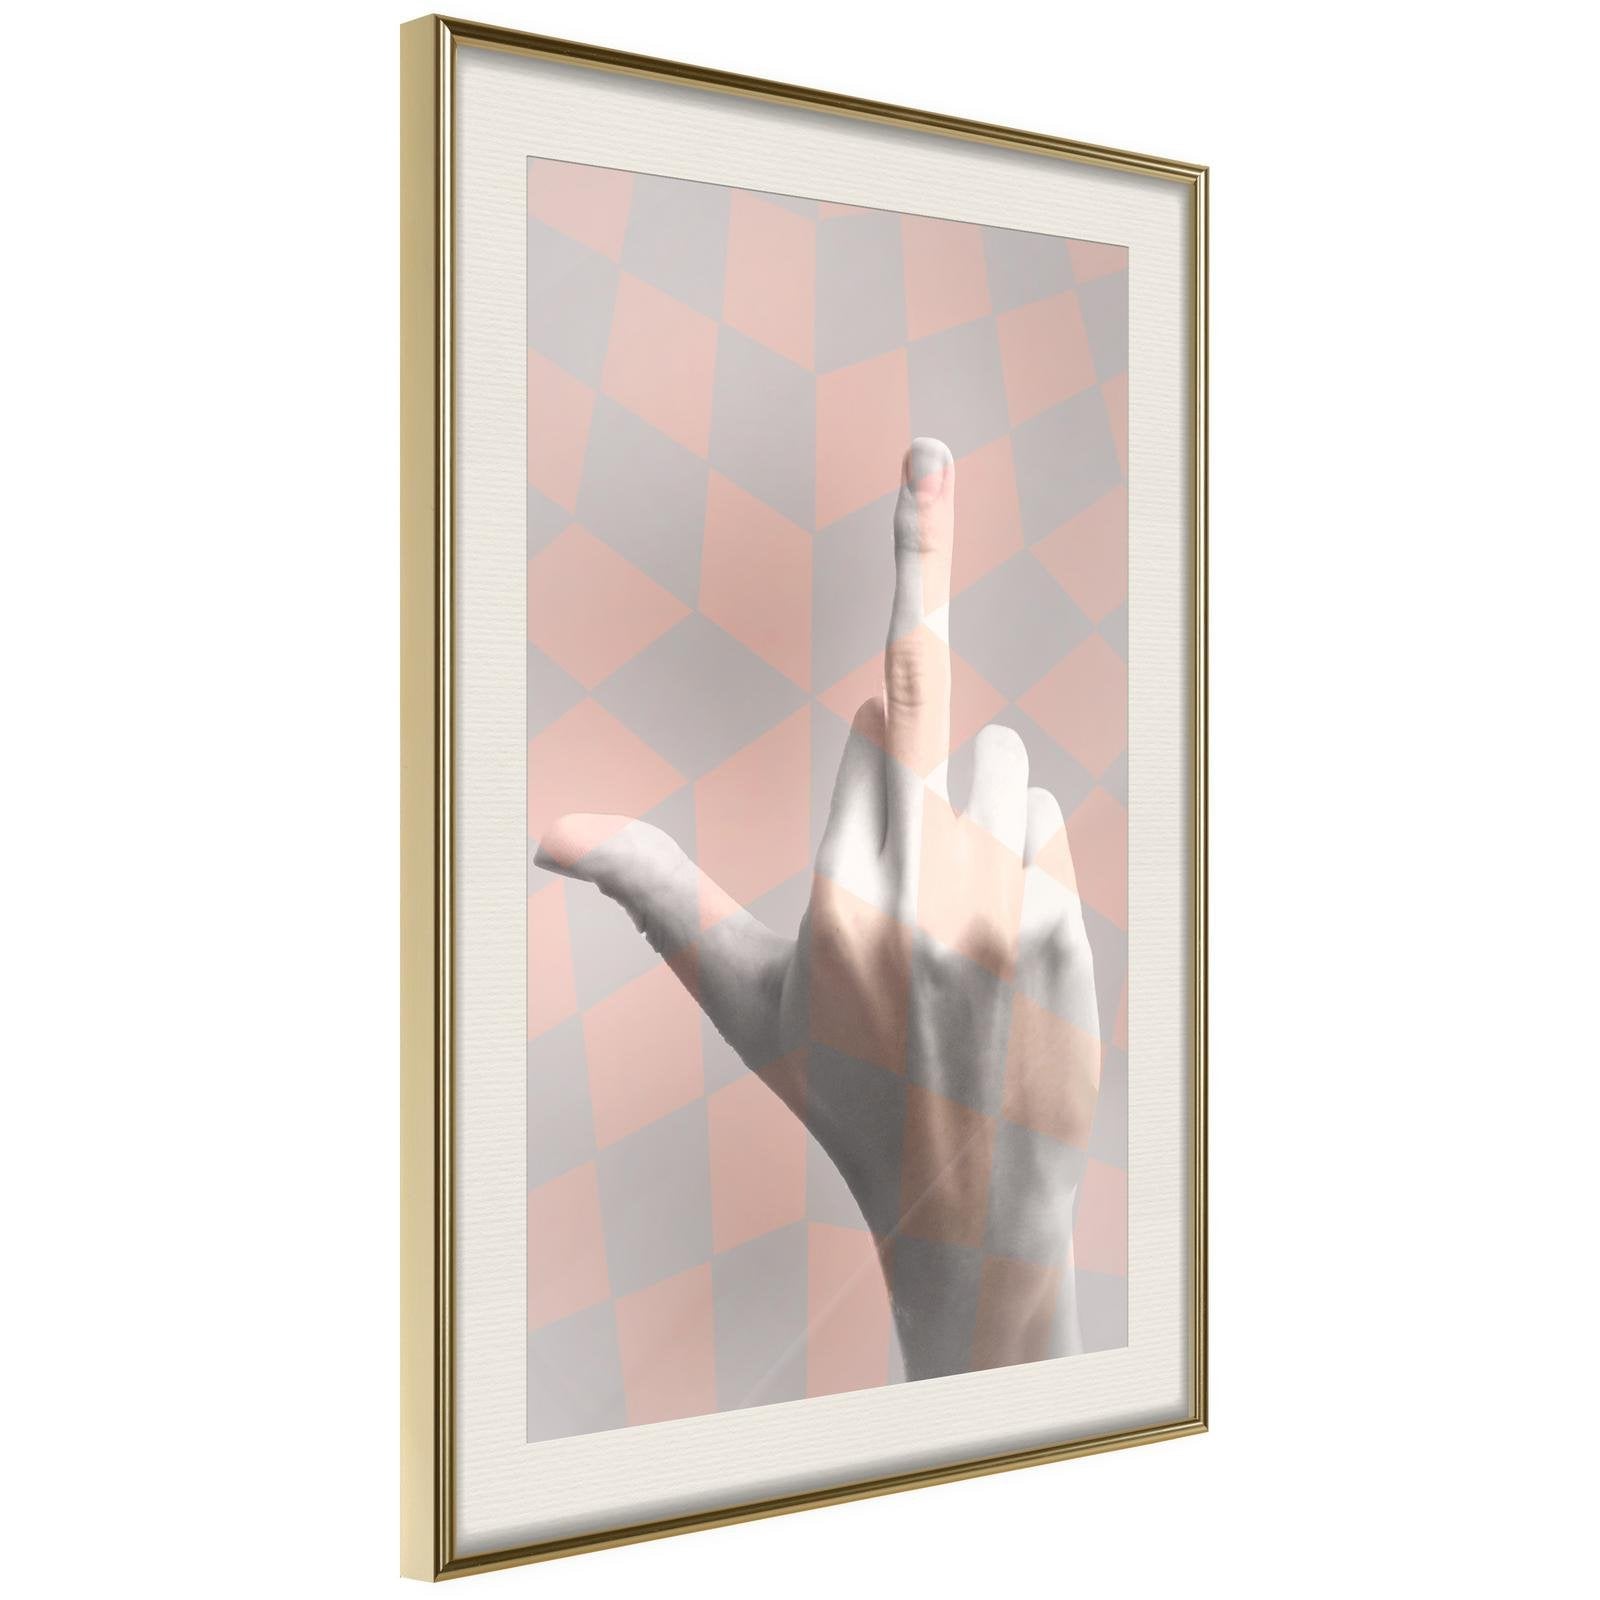 Inramad Poster / Tavla - Middle Finger-Poster Inramad-Artgeist-20x30-Guldram med passepartout-peaceofhome.se